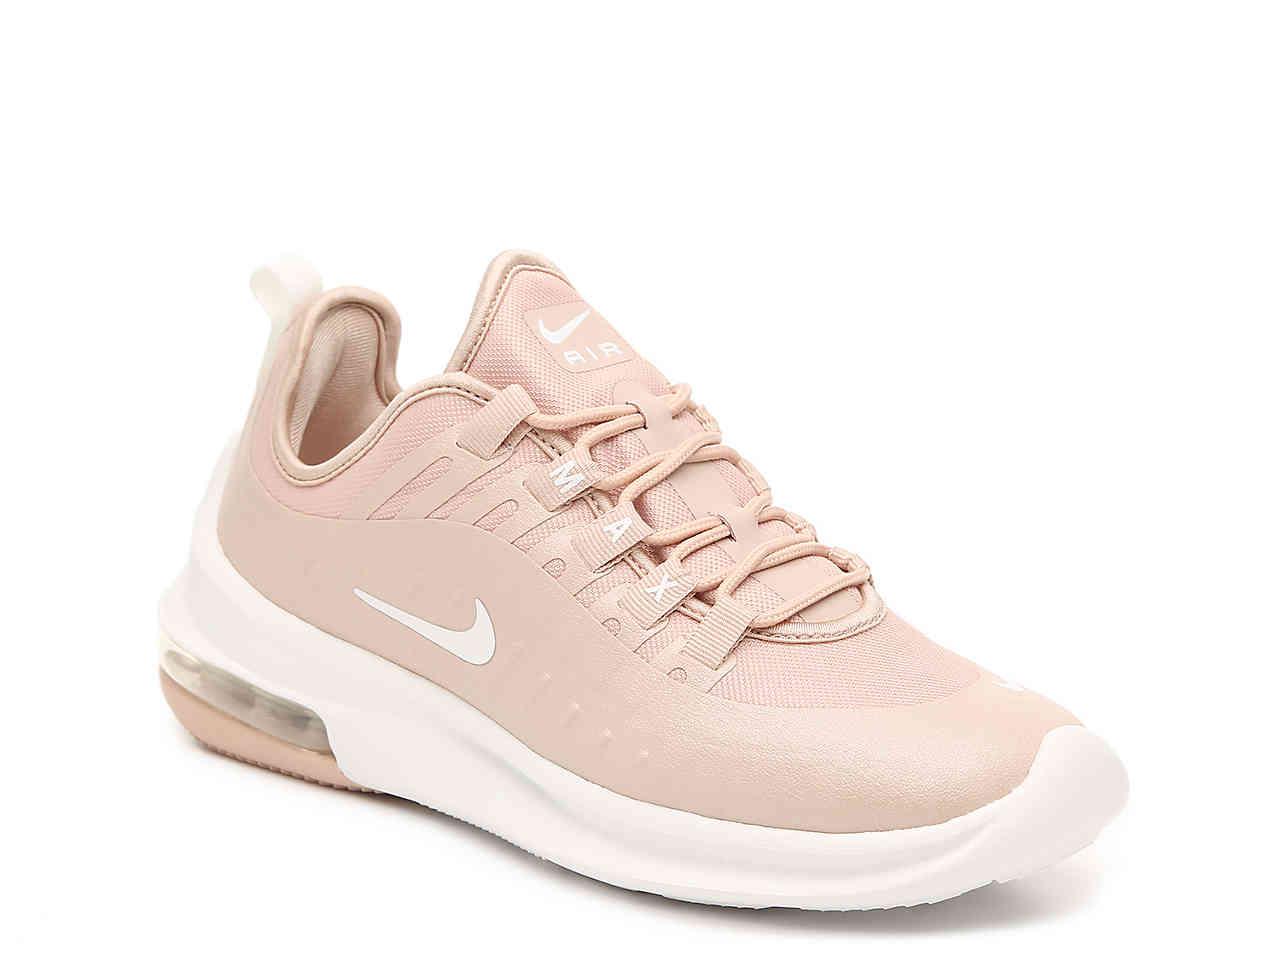 Nike Synthetic Air Max Axis Sneaker in Light Pink (Pink) - Lyst